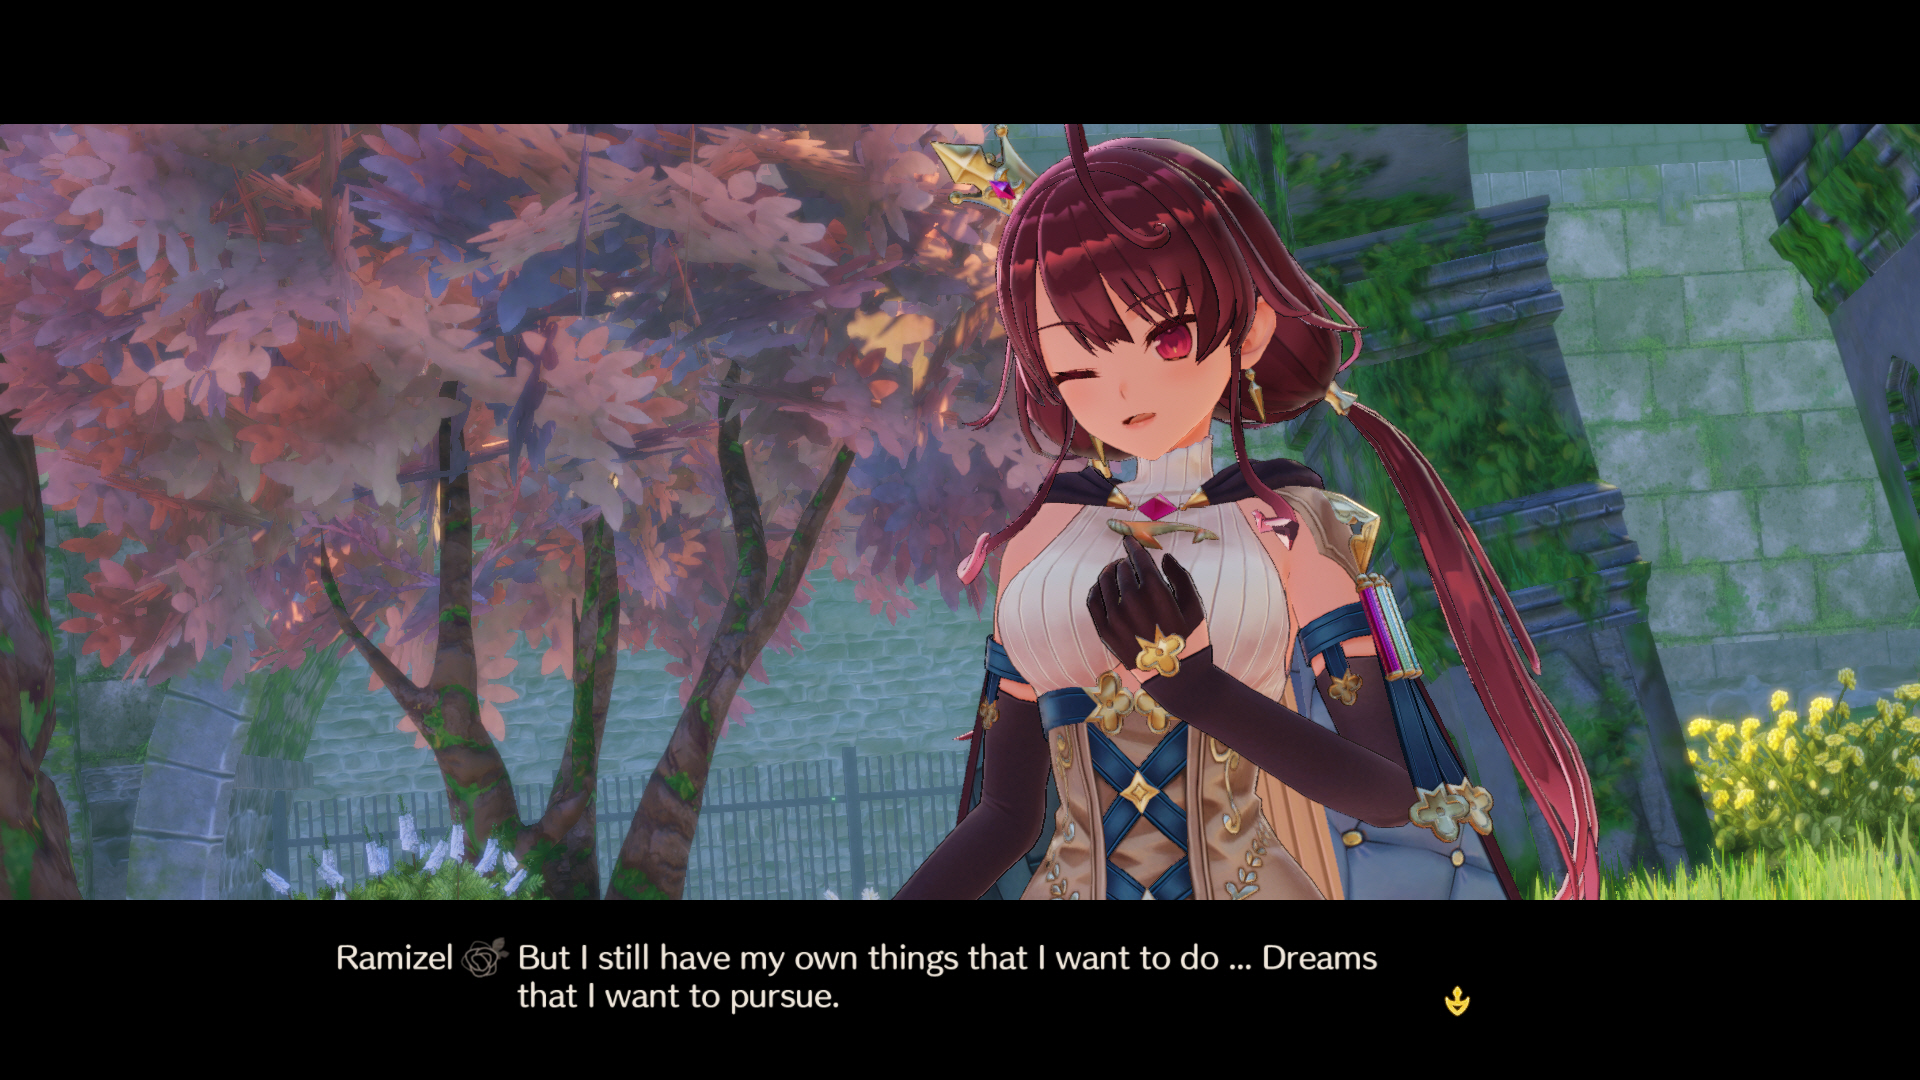 Atelier sophie 2 the alchemist of the mysterious dream screenshot 5 6